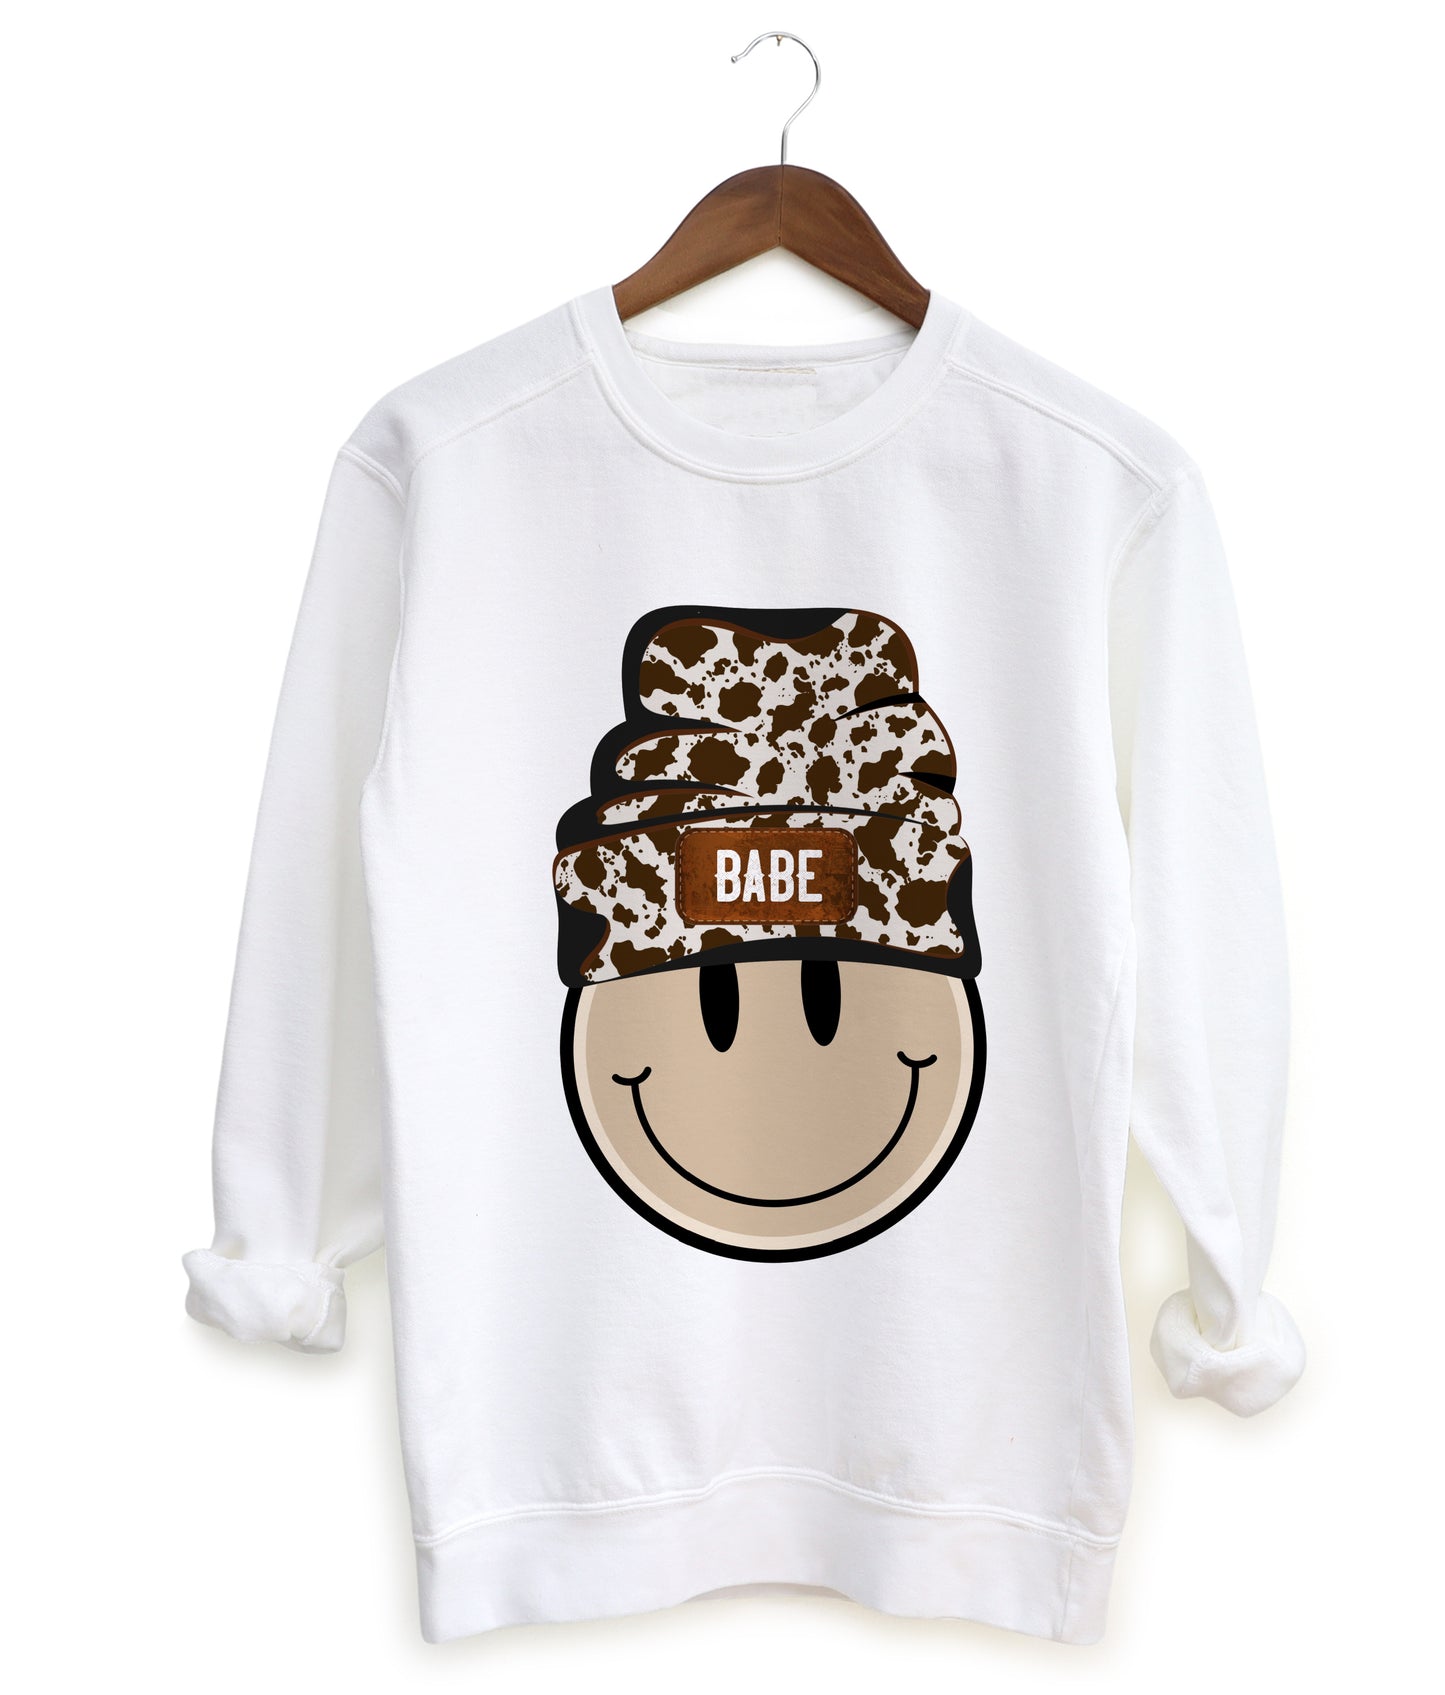 Gildan, Bella Canvas, or Comfort Colors Babe Beanie Cow Print Western Sweatshirt -Youth, Adult Sized